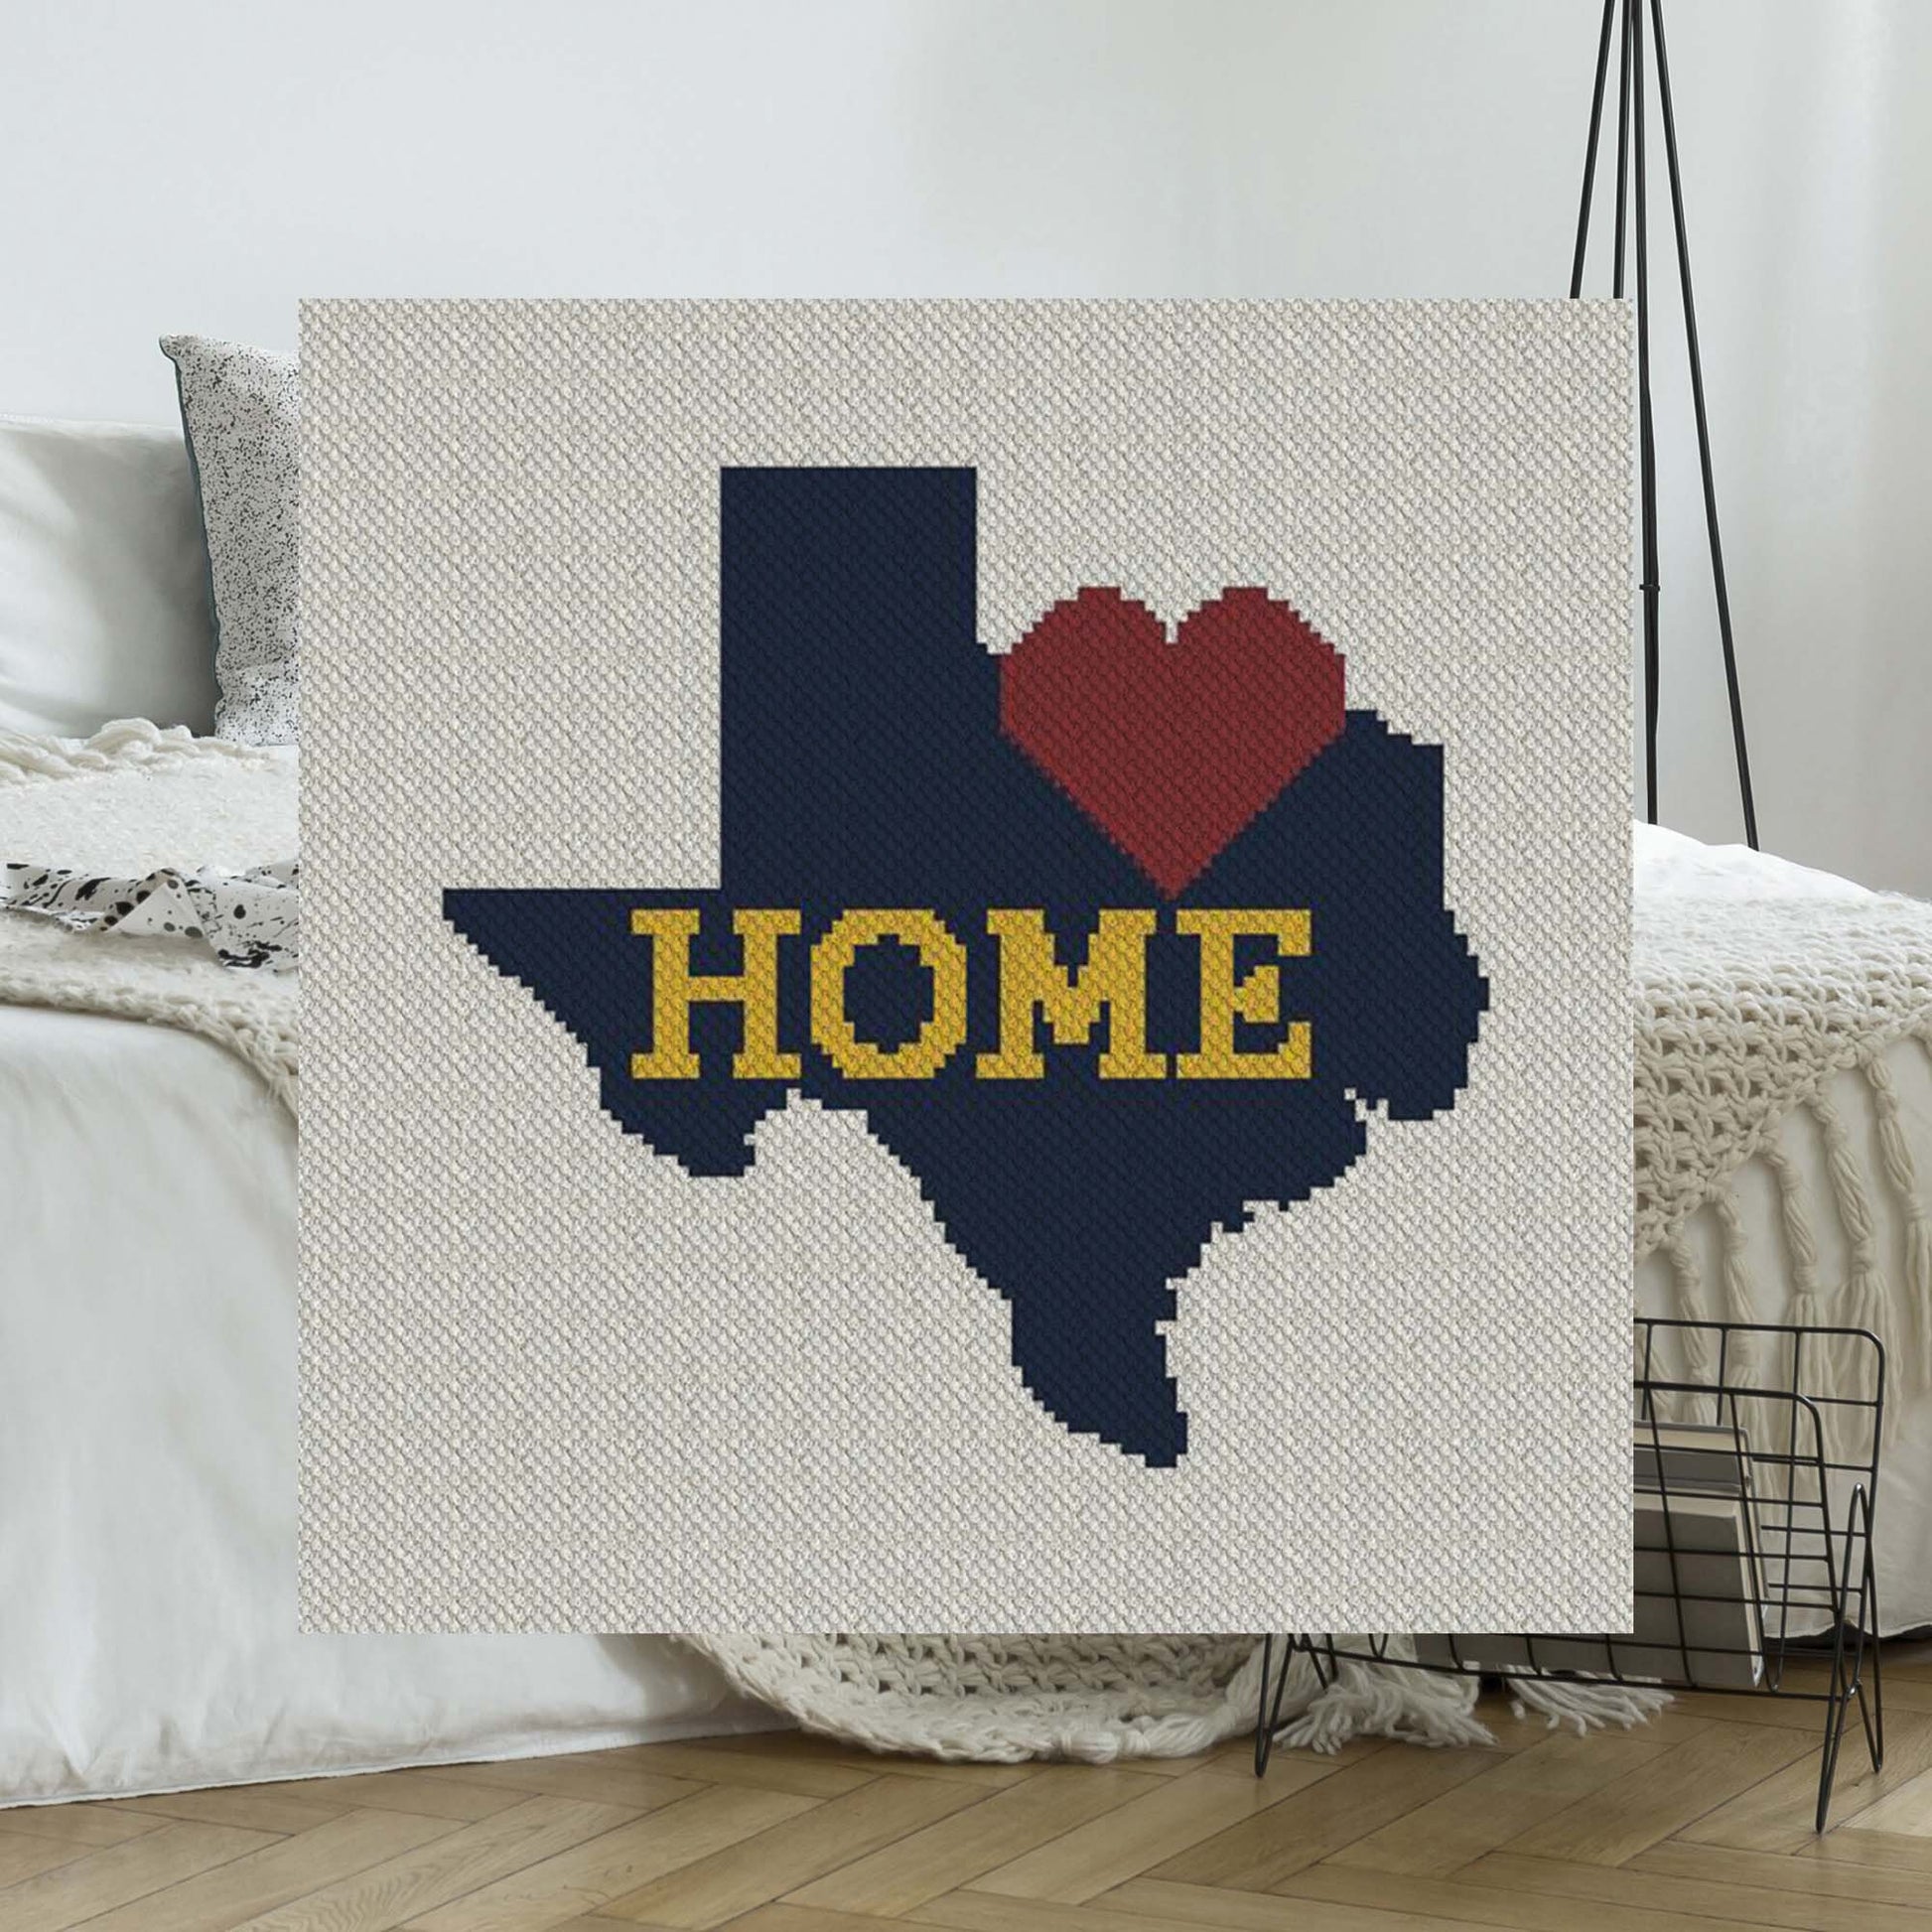 Greater Texas Home C2C Afghan Crochet Pattern